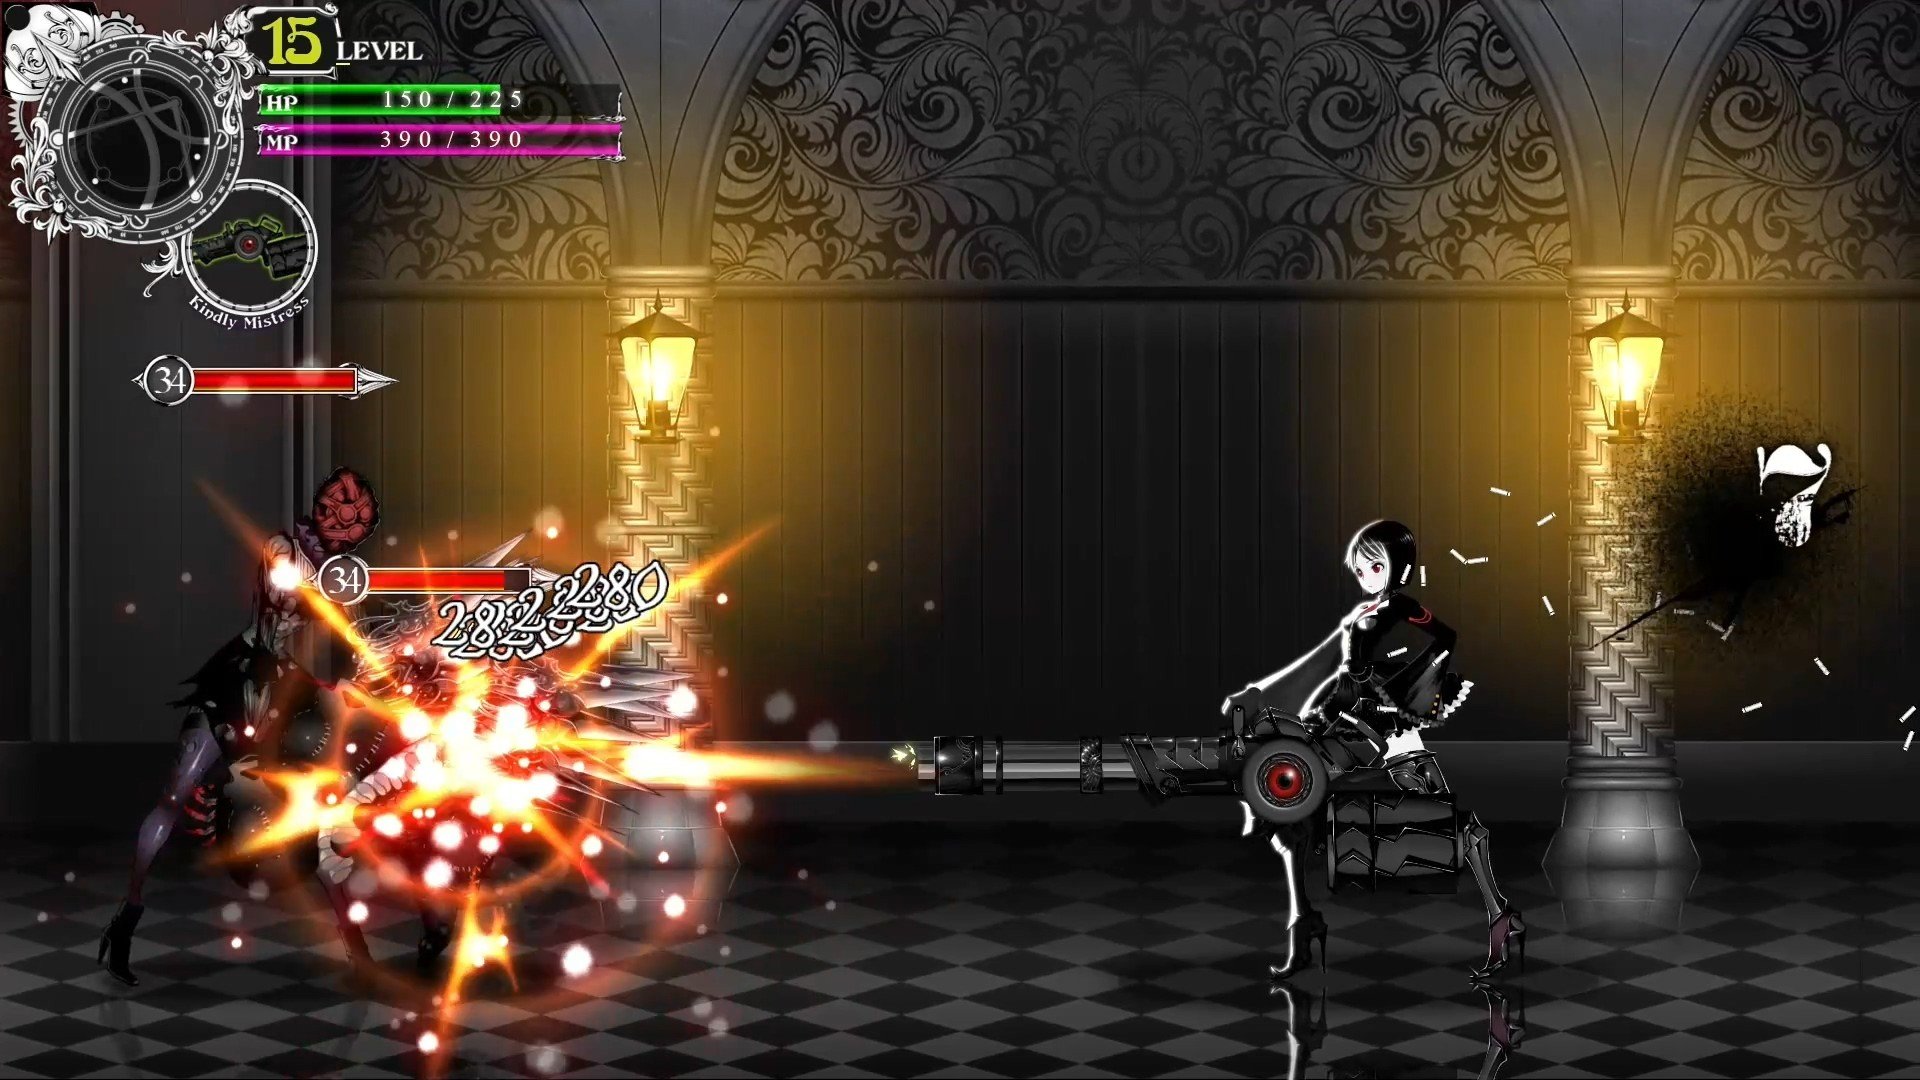 #
      Side-scrolling gothic action RPG Black Witchcraft for PC launches September 8